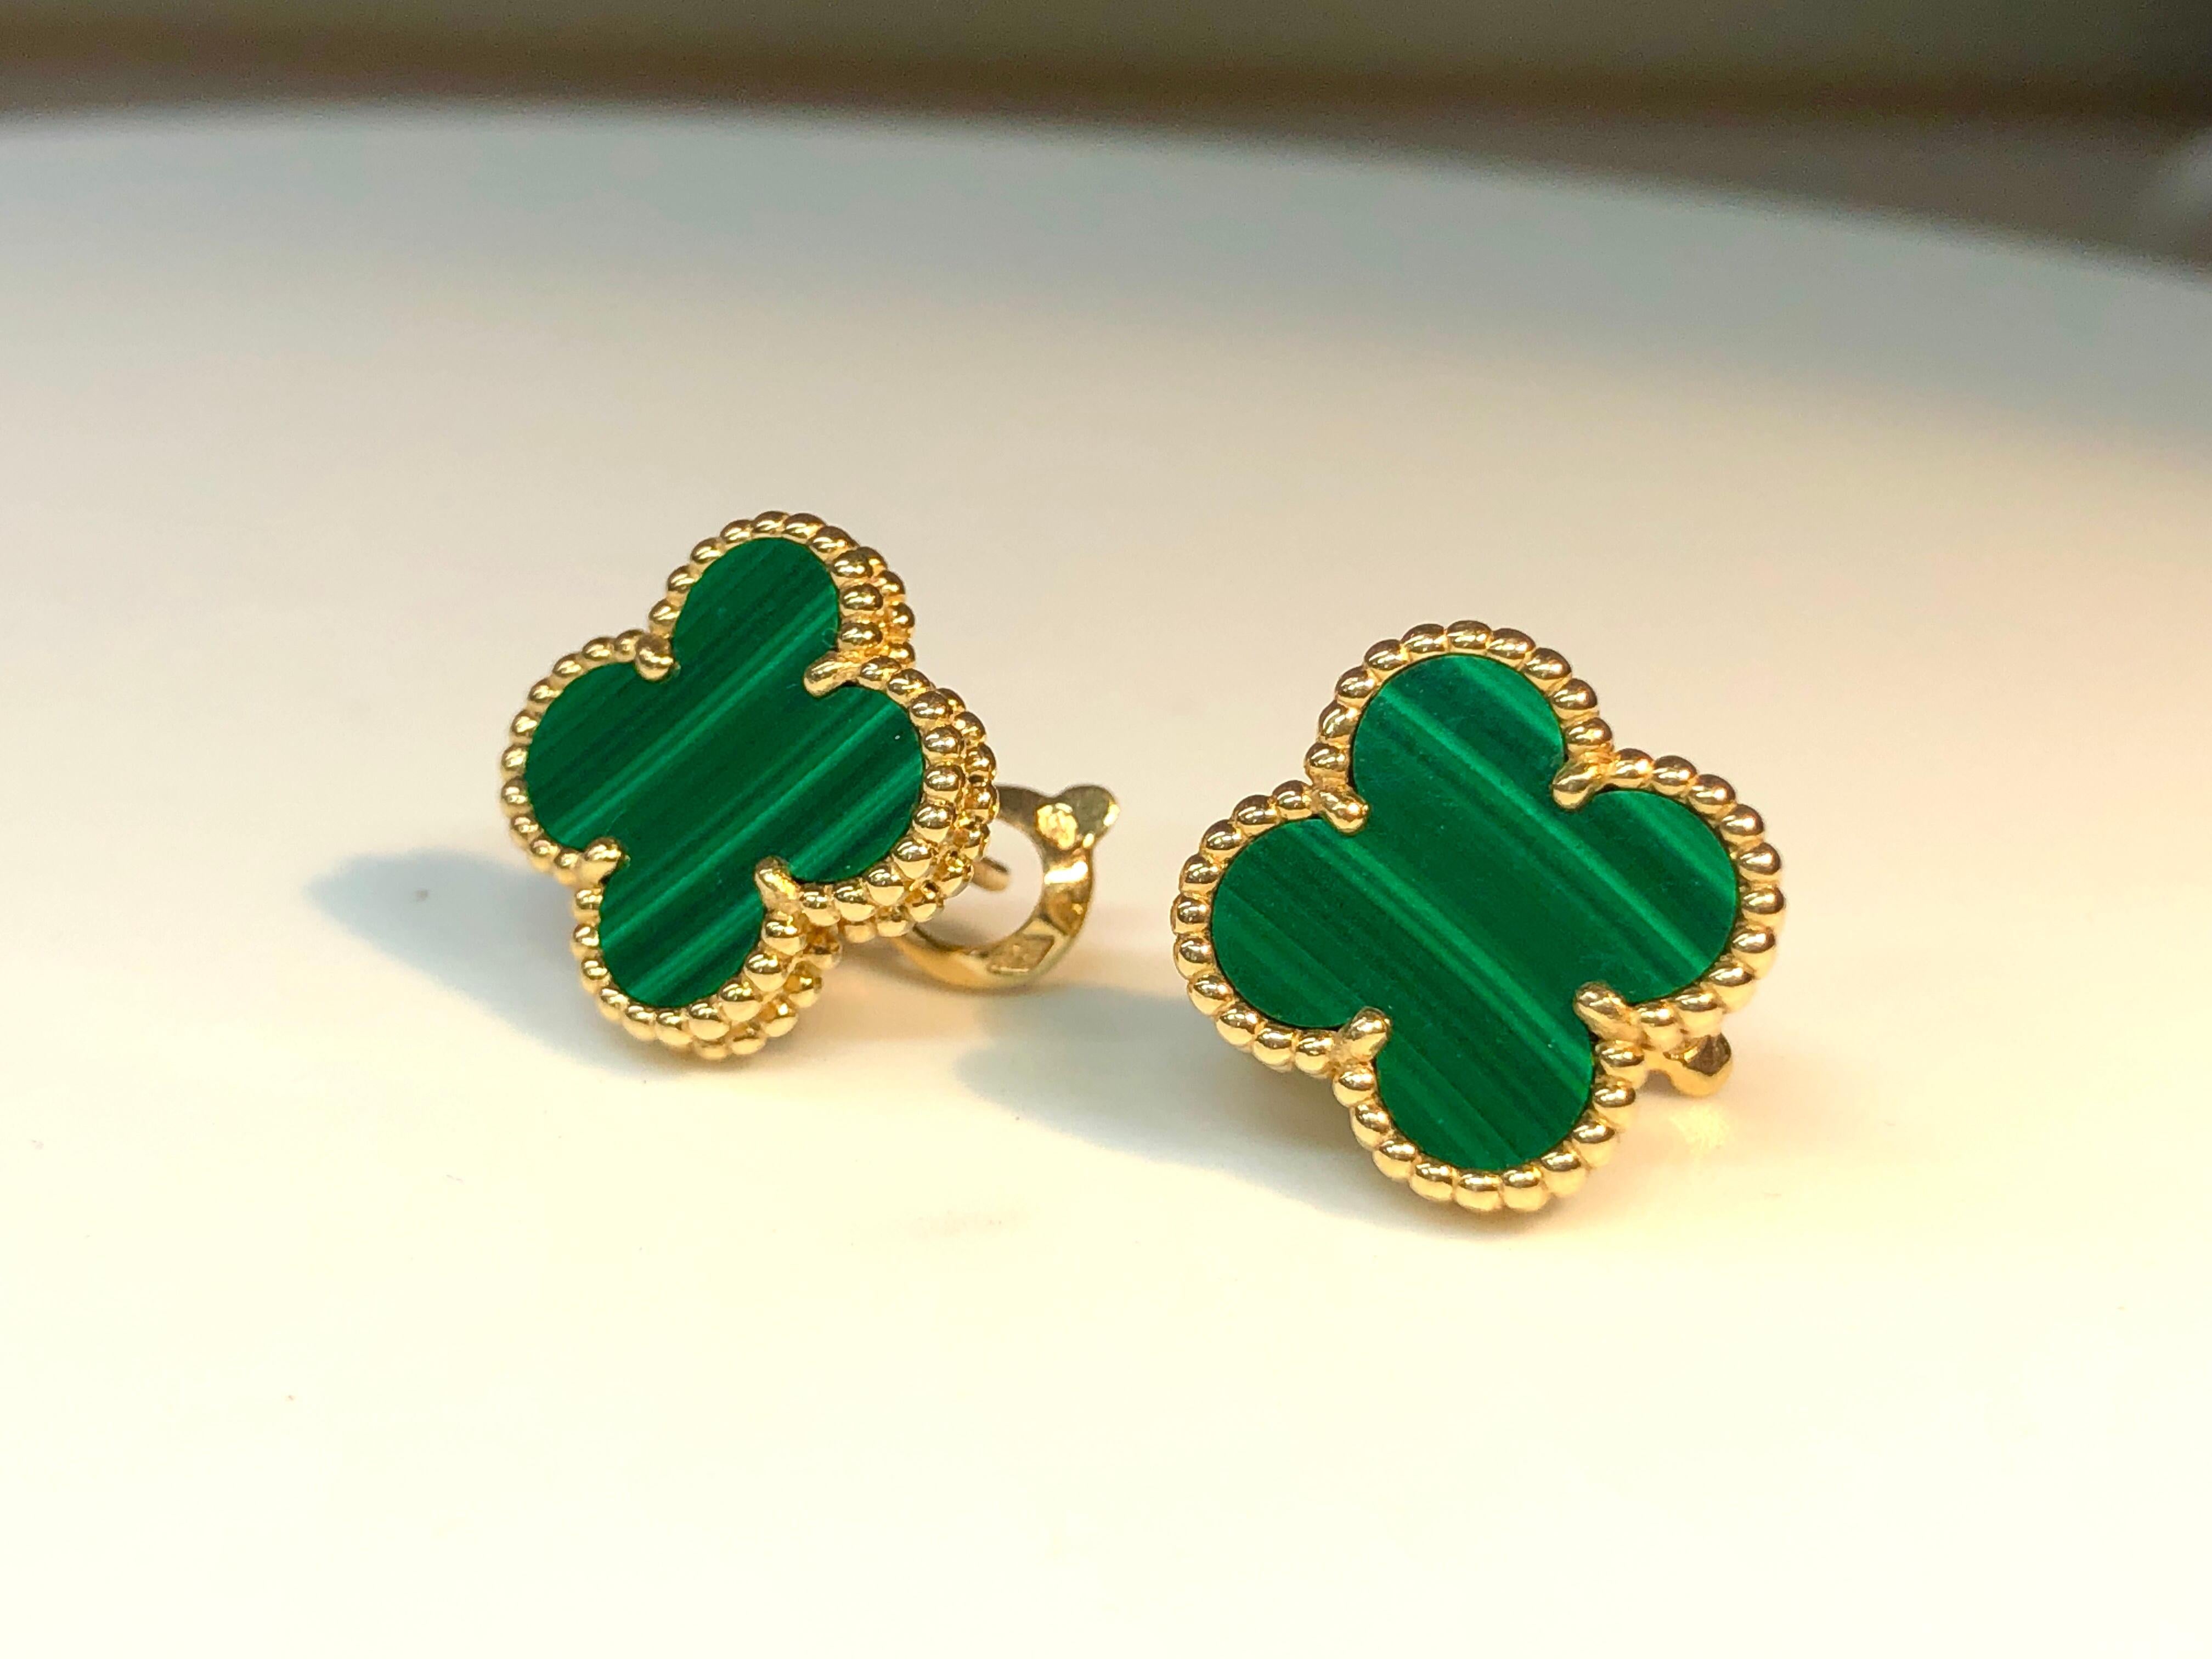 Vintage Alhambra earrings set in 18k yellow gold with malachite clover motifs. Inspired by the clover leaf, these icons of luck are adorned with a border of golden beads. 
The earrings come in a VCA Pouch. Original certificate of authenticity.